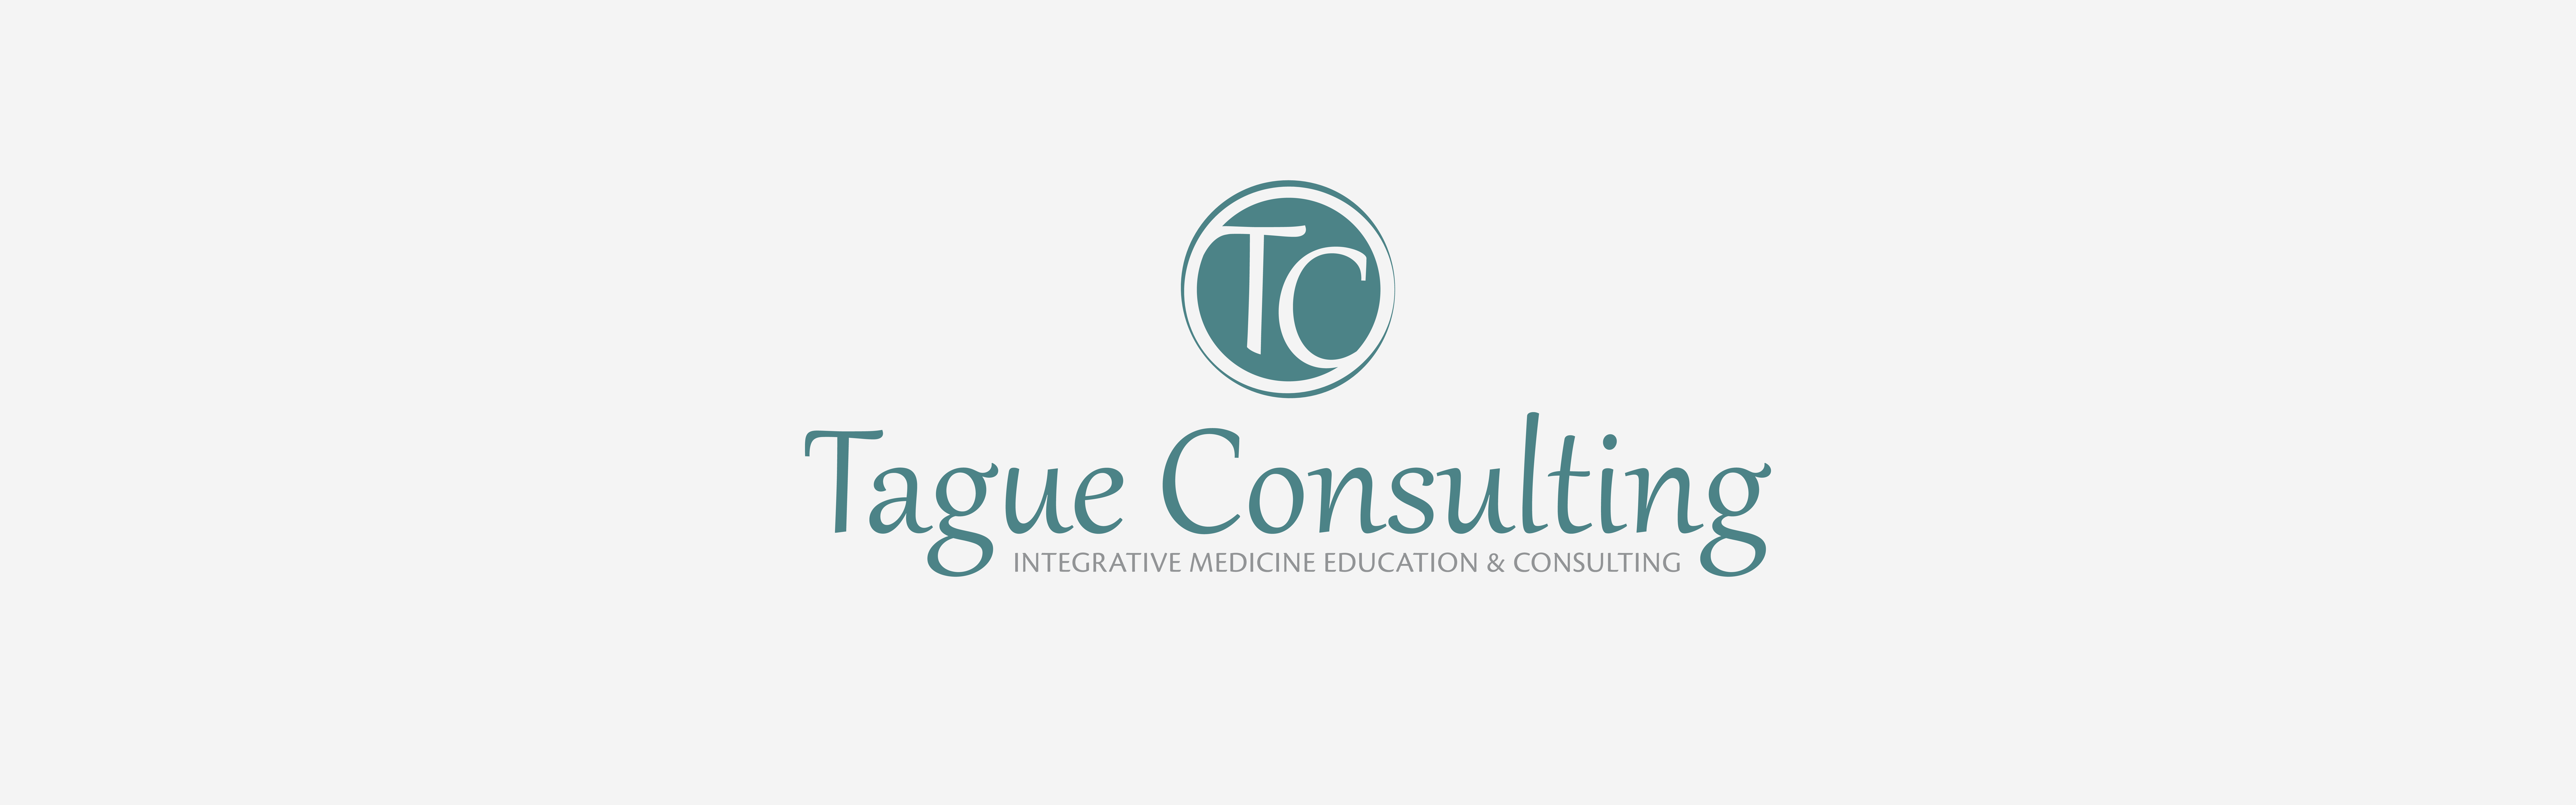 Logo of Tague Consulting, featuring an intertwined 'T' and 'C' above the company name, which specializes in integrative medicine education & consulting.